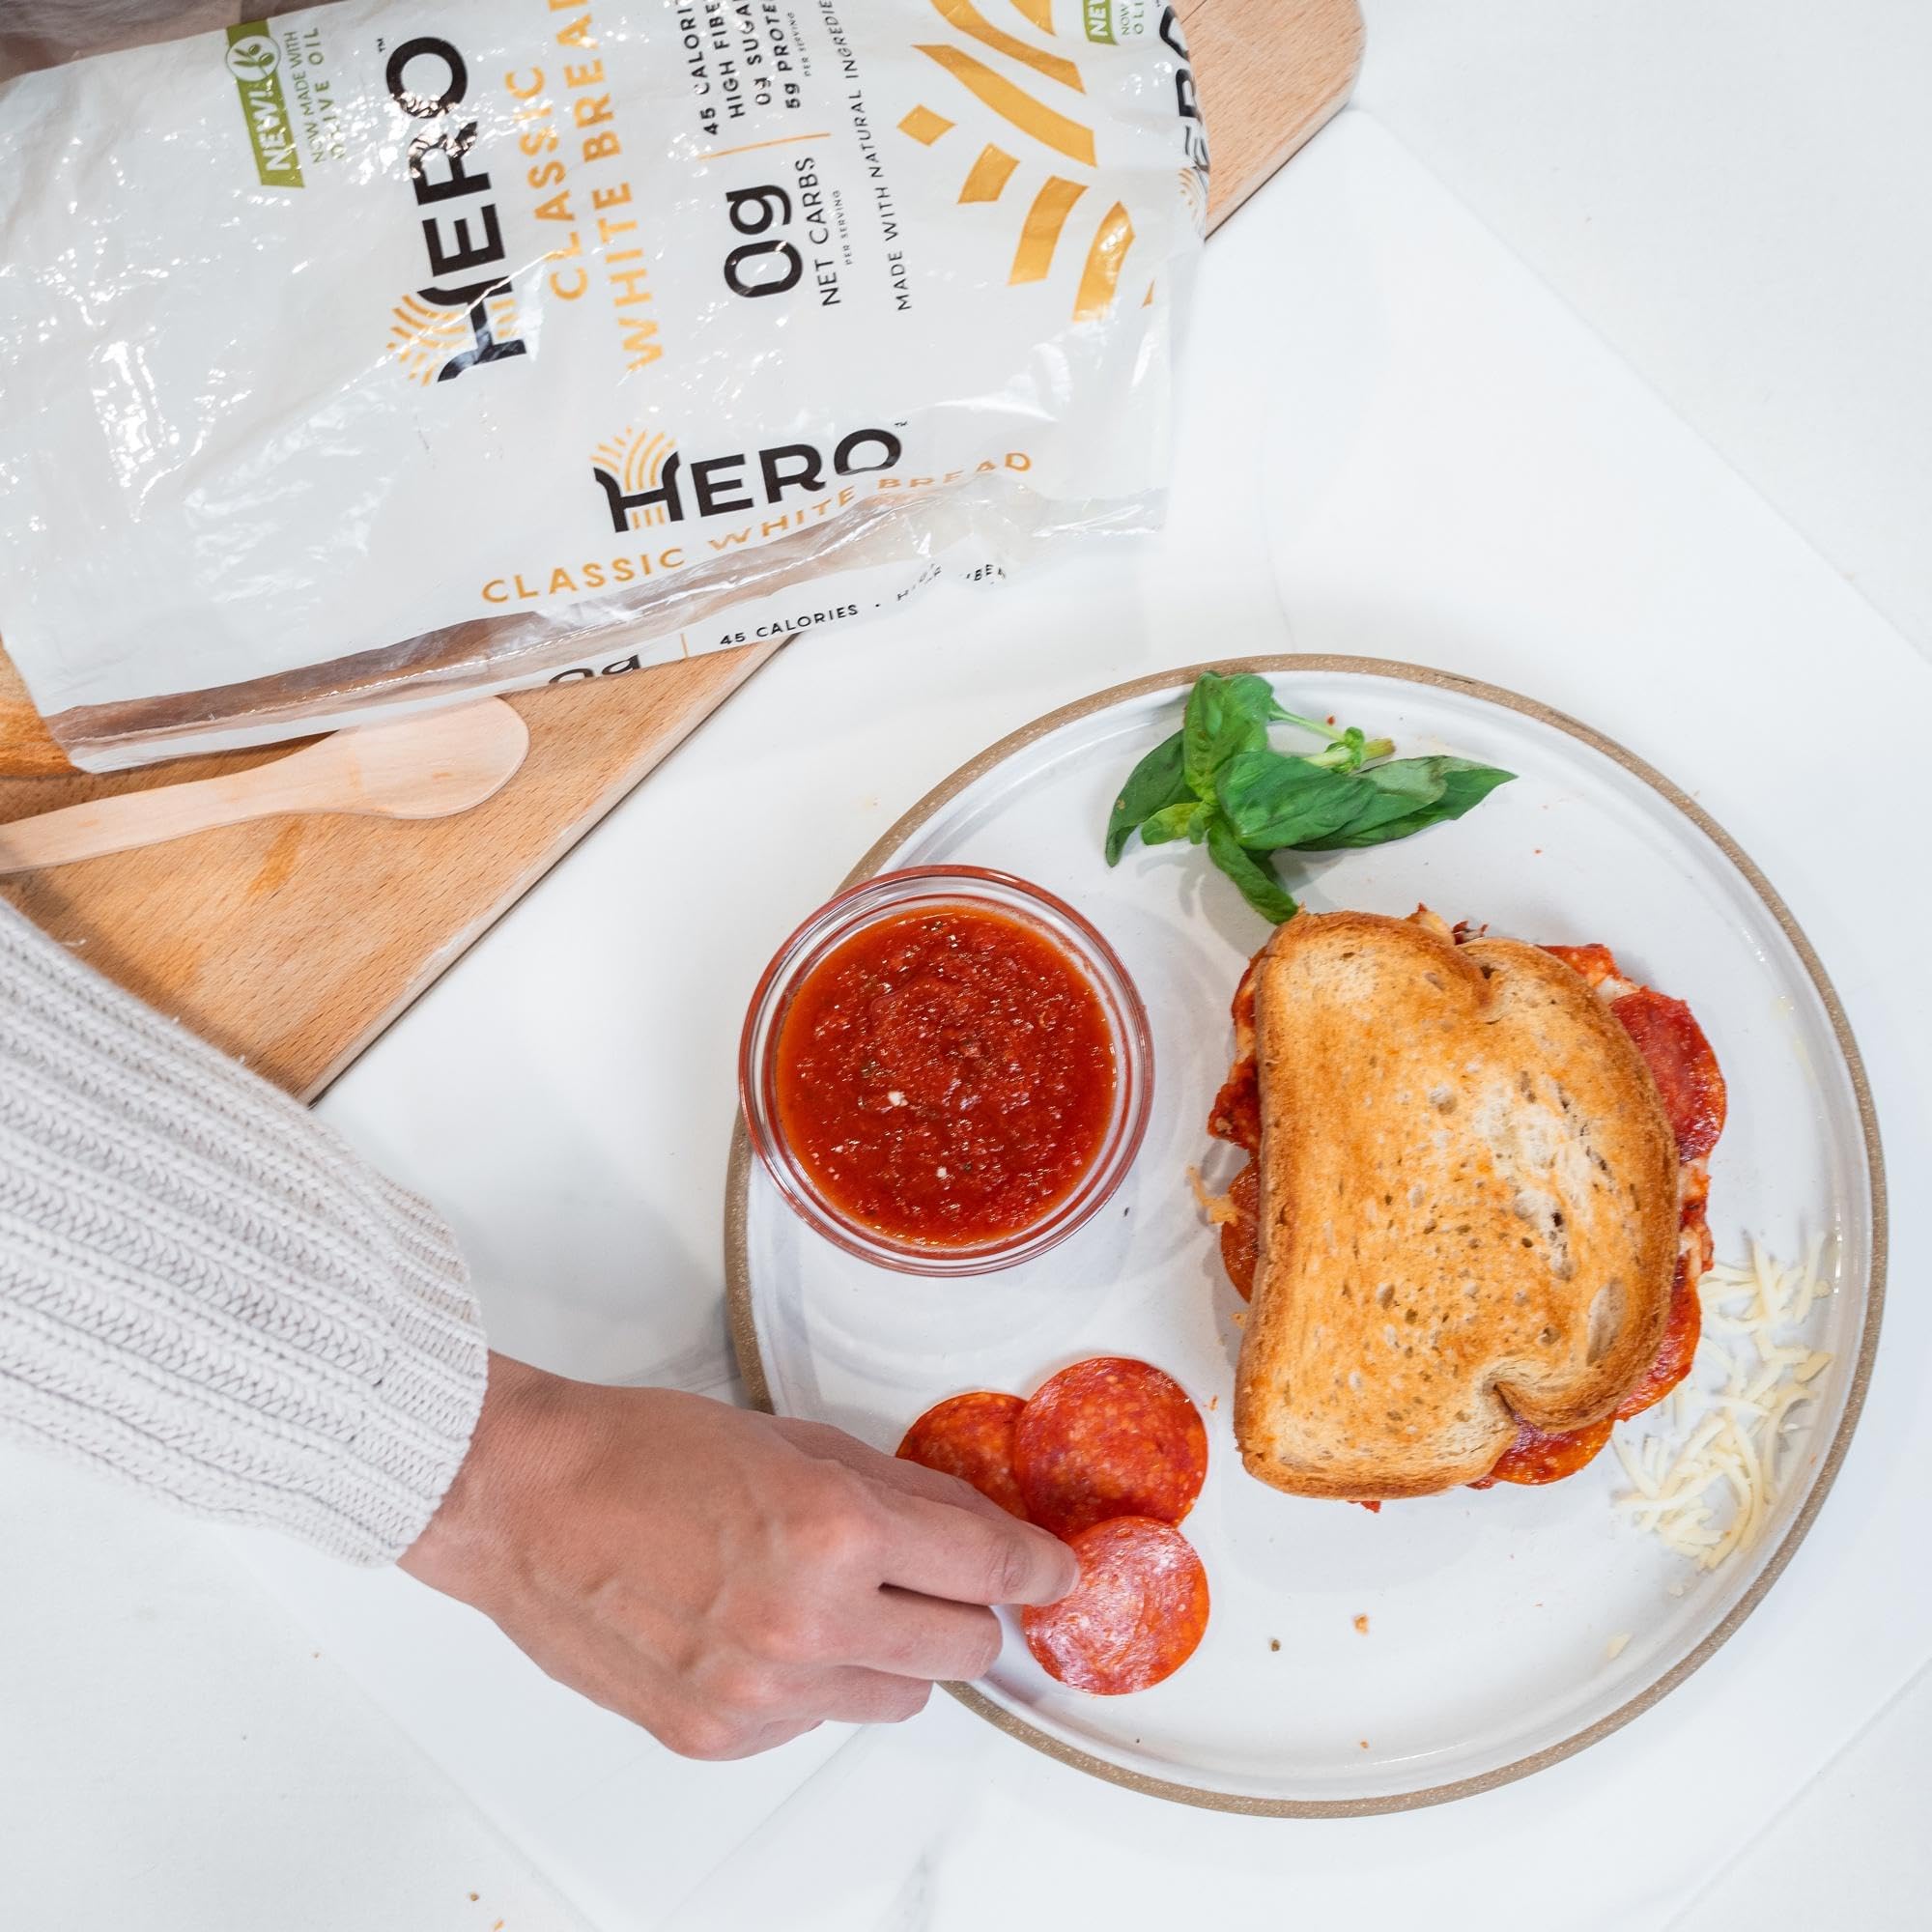 Hero Classic White Bread — Delicious Bread with 0g Net Carb, 0g Sugar, 45 Calories, 11g Fiber per Slice | Tastes Like Regular Bread | Low Carb & Keto Friendly Bread Loaf —15 Slices/Loaf, 2 Loaves